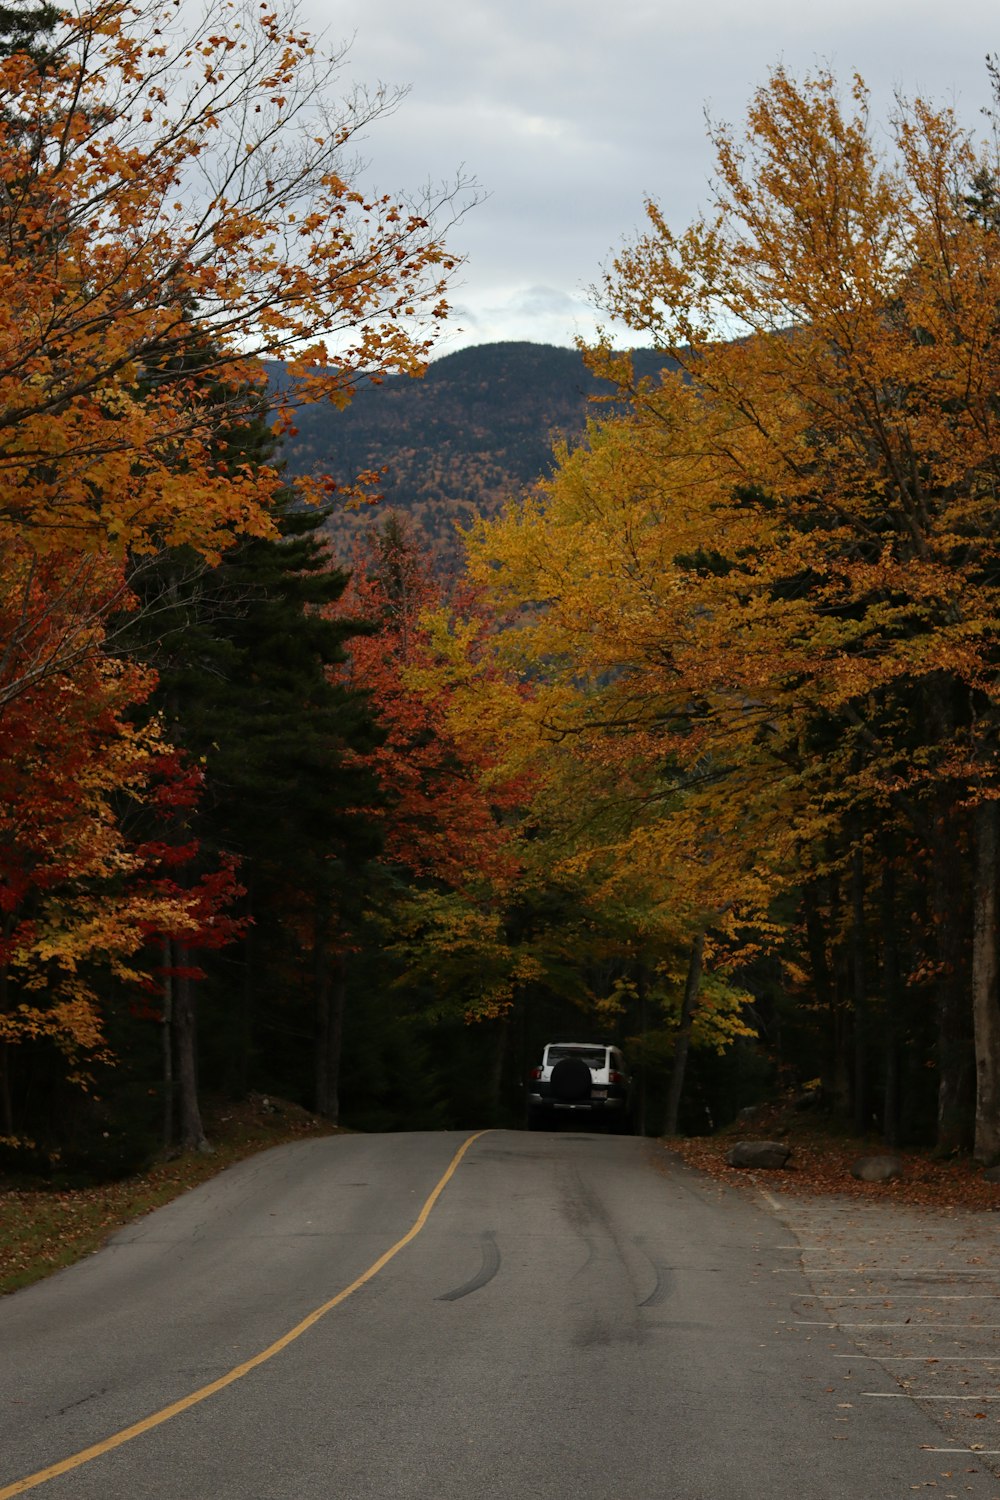 black car on road between trees during daytime